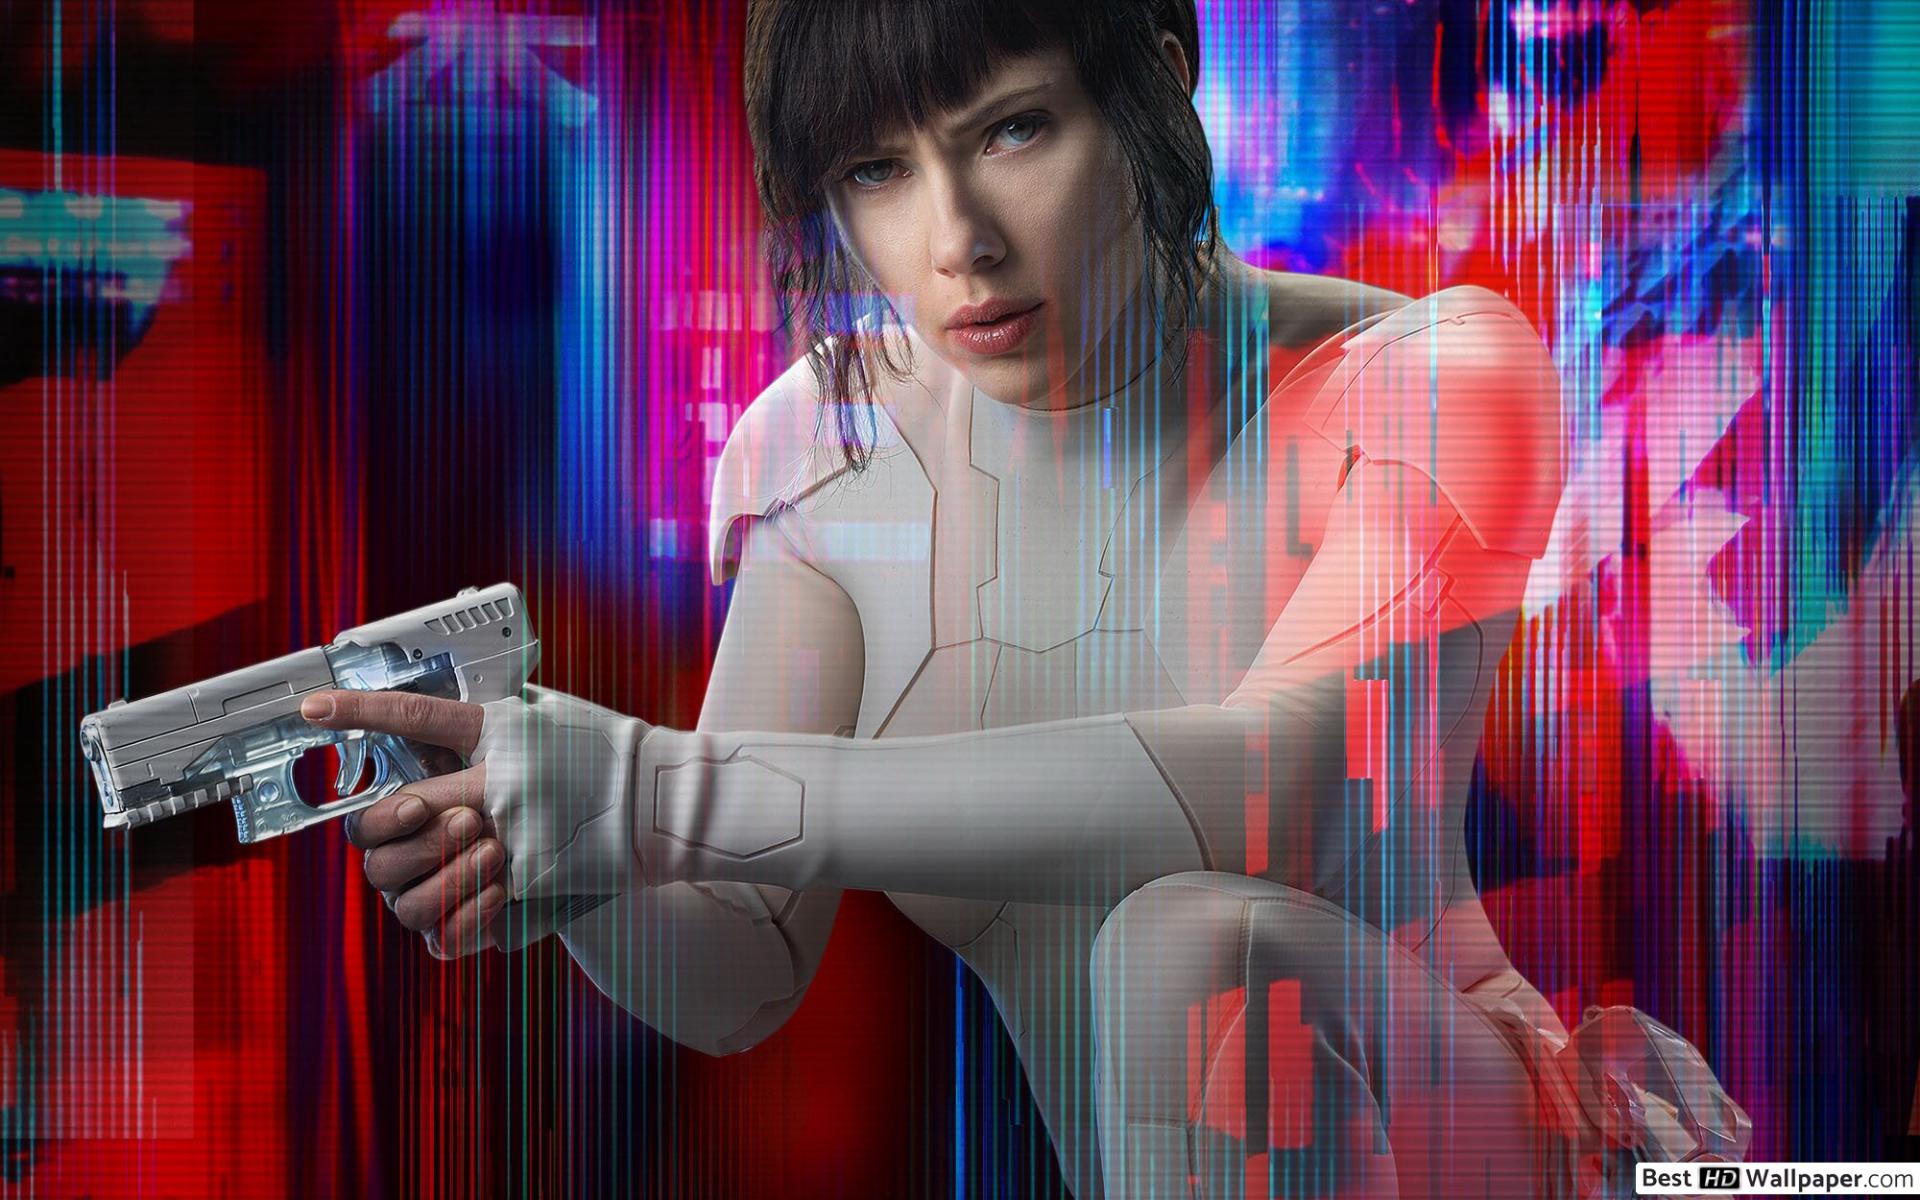 Major Ghost In The Shell 2017 - HD Wallpaper 